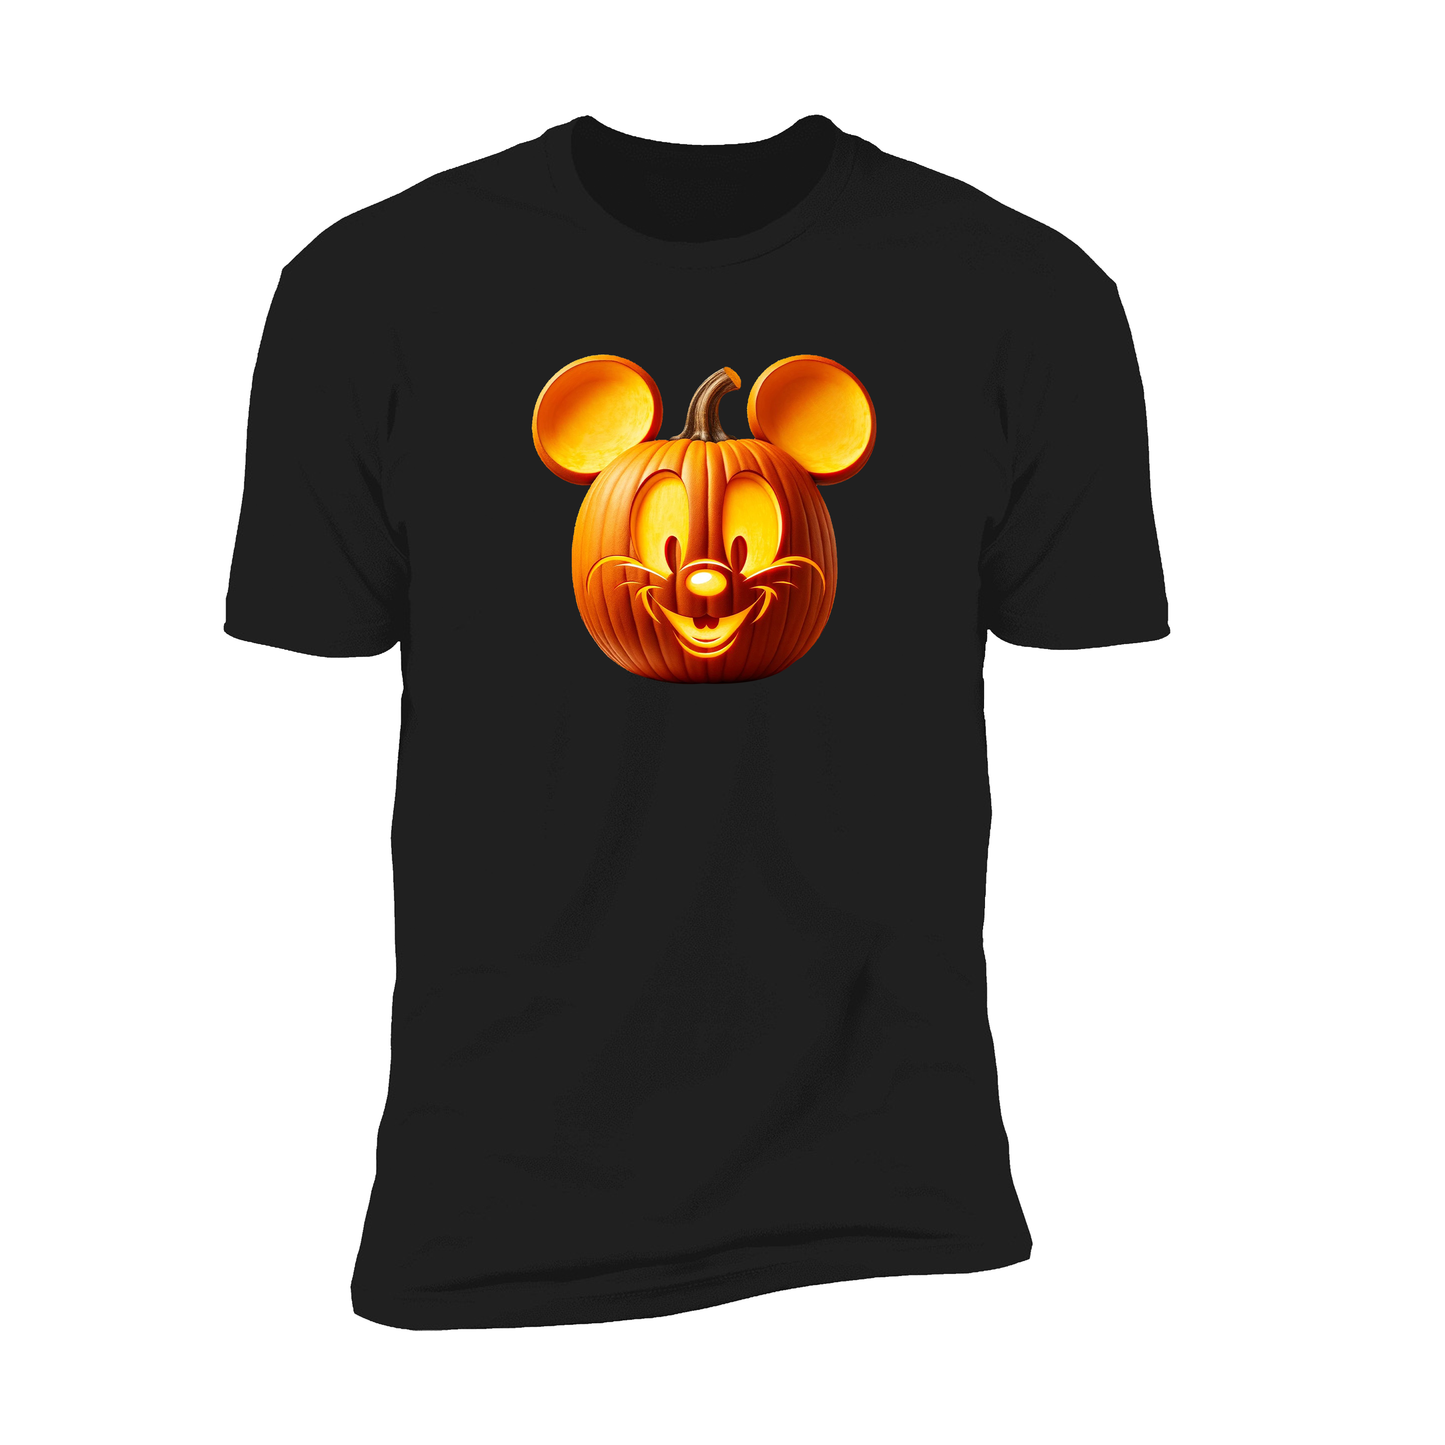 Cute Deluxe Couples Halloween Shirts